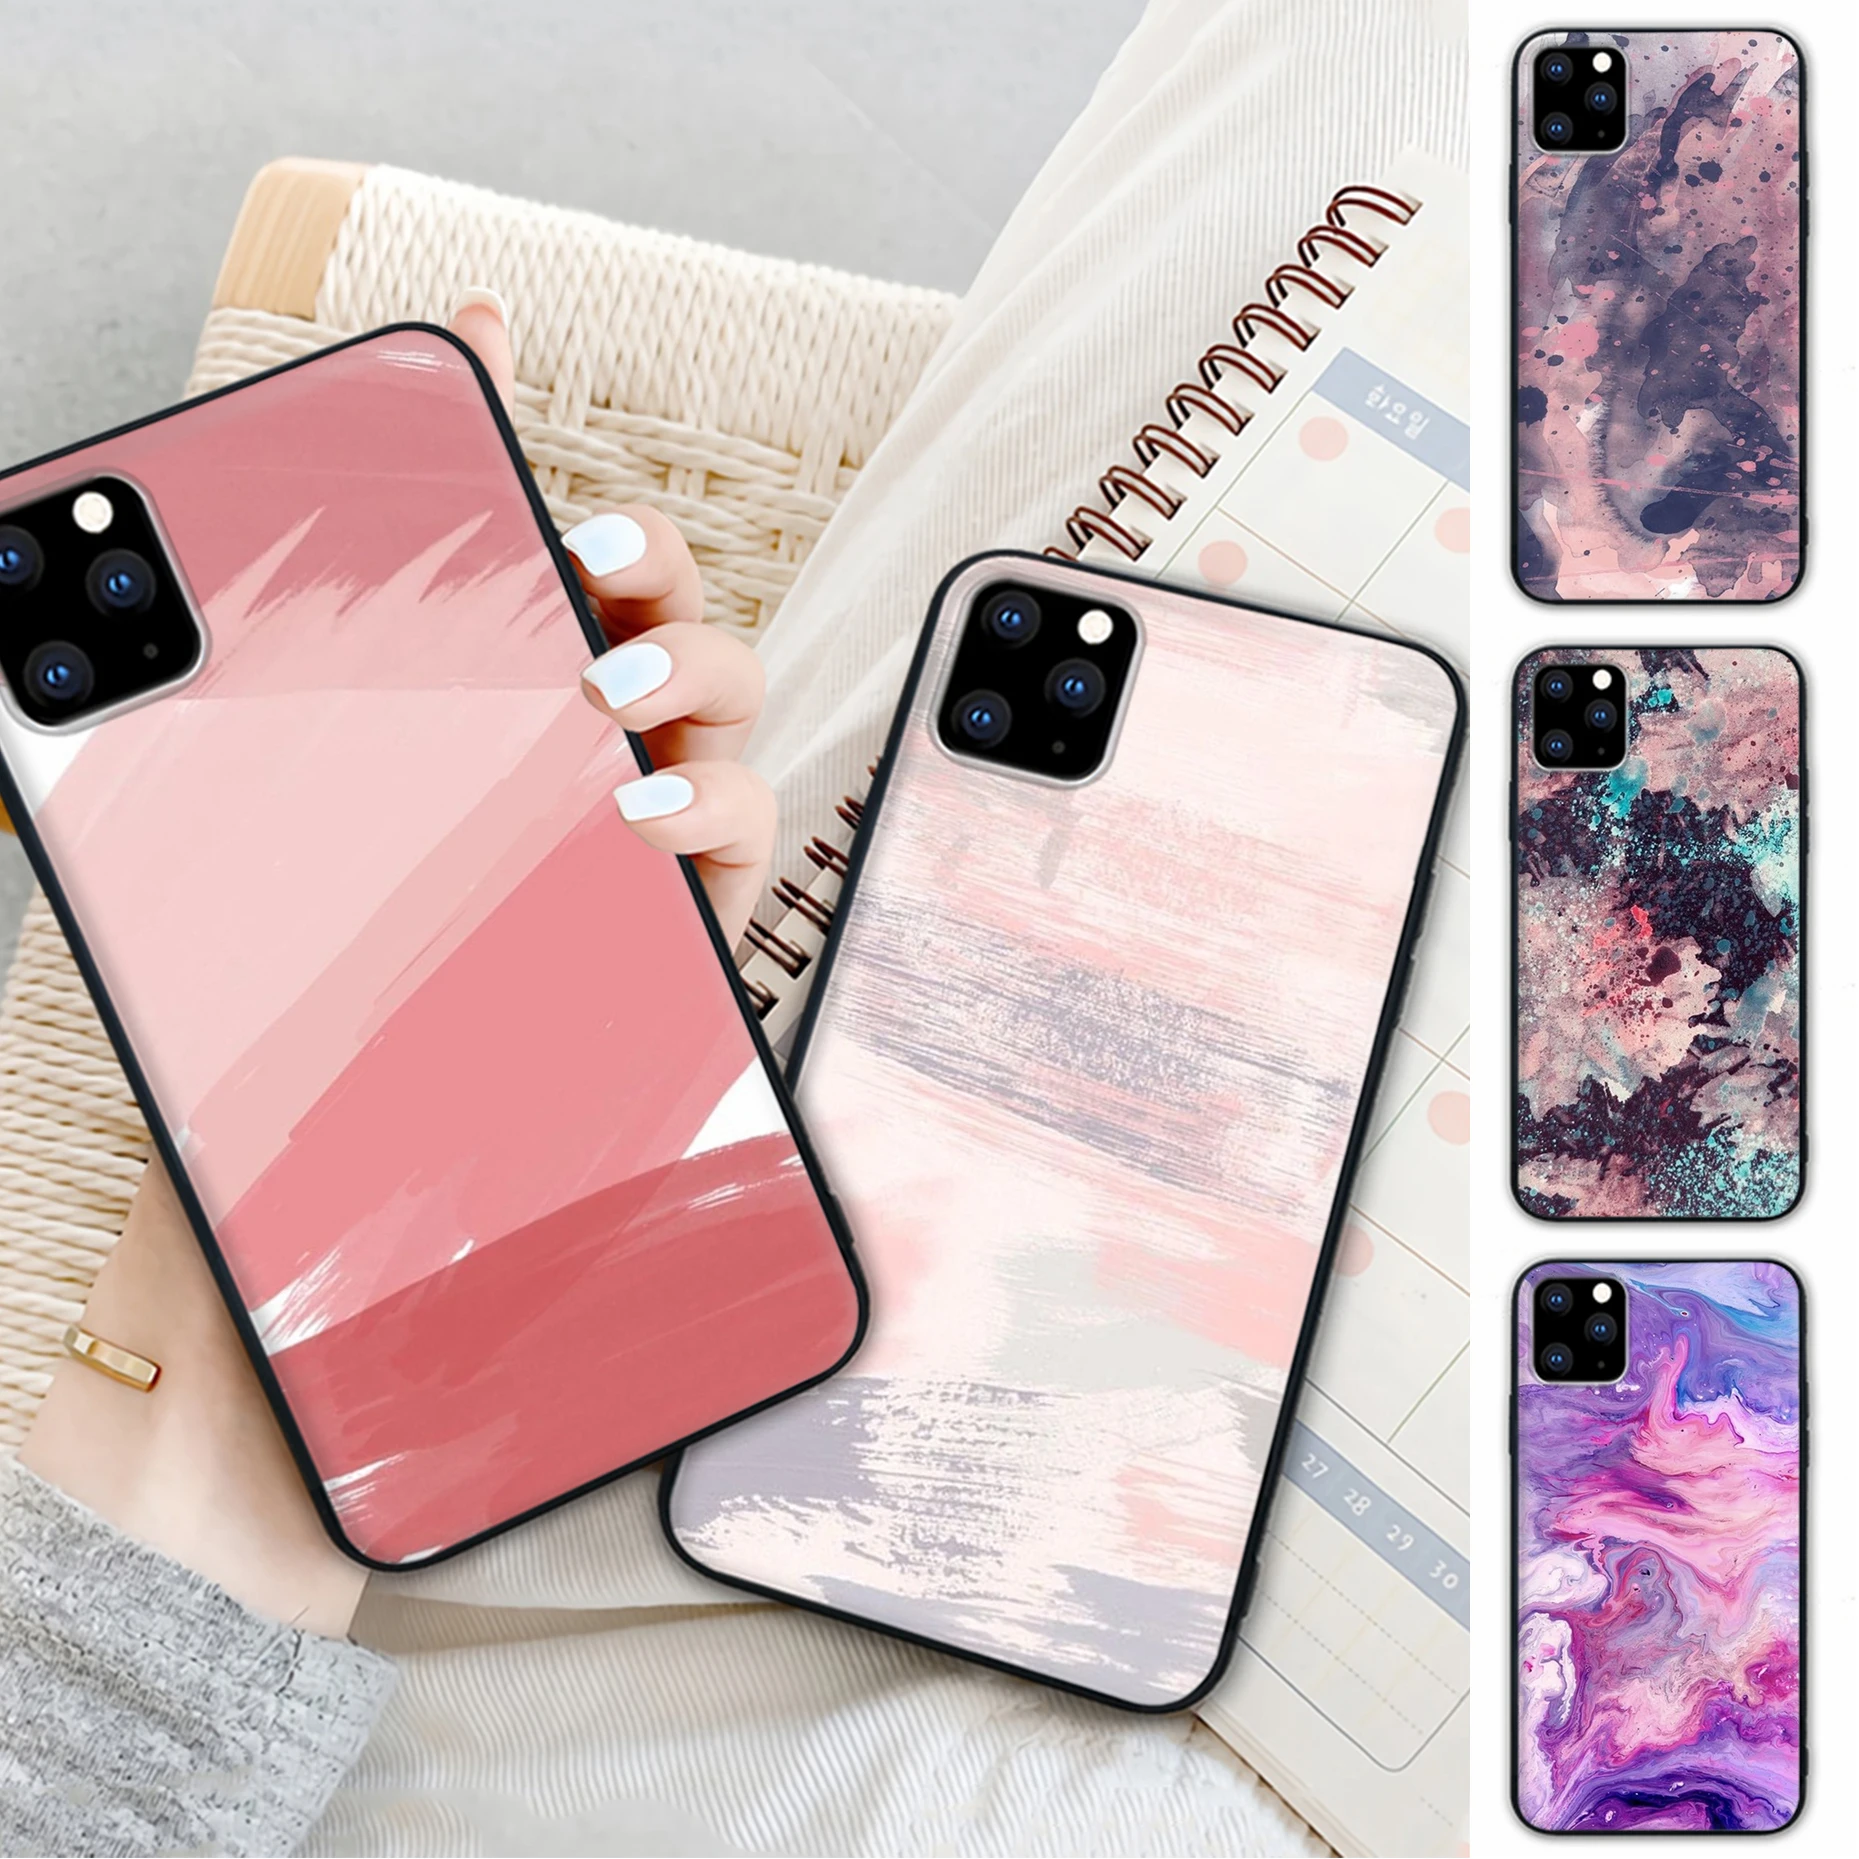 

Rubber Art Color Printting Graffiti Telephone Case For Samsung Galaxy M30S A01 A21 A31 A51 A71 A91 A10S A20S A30S A50S Cover